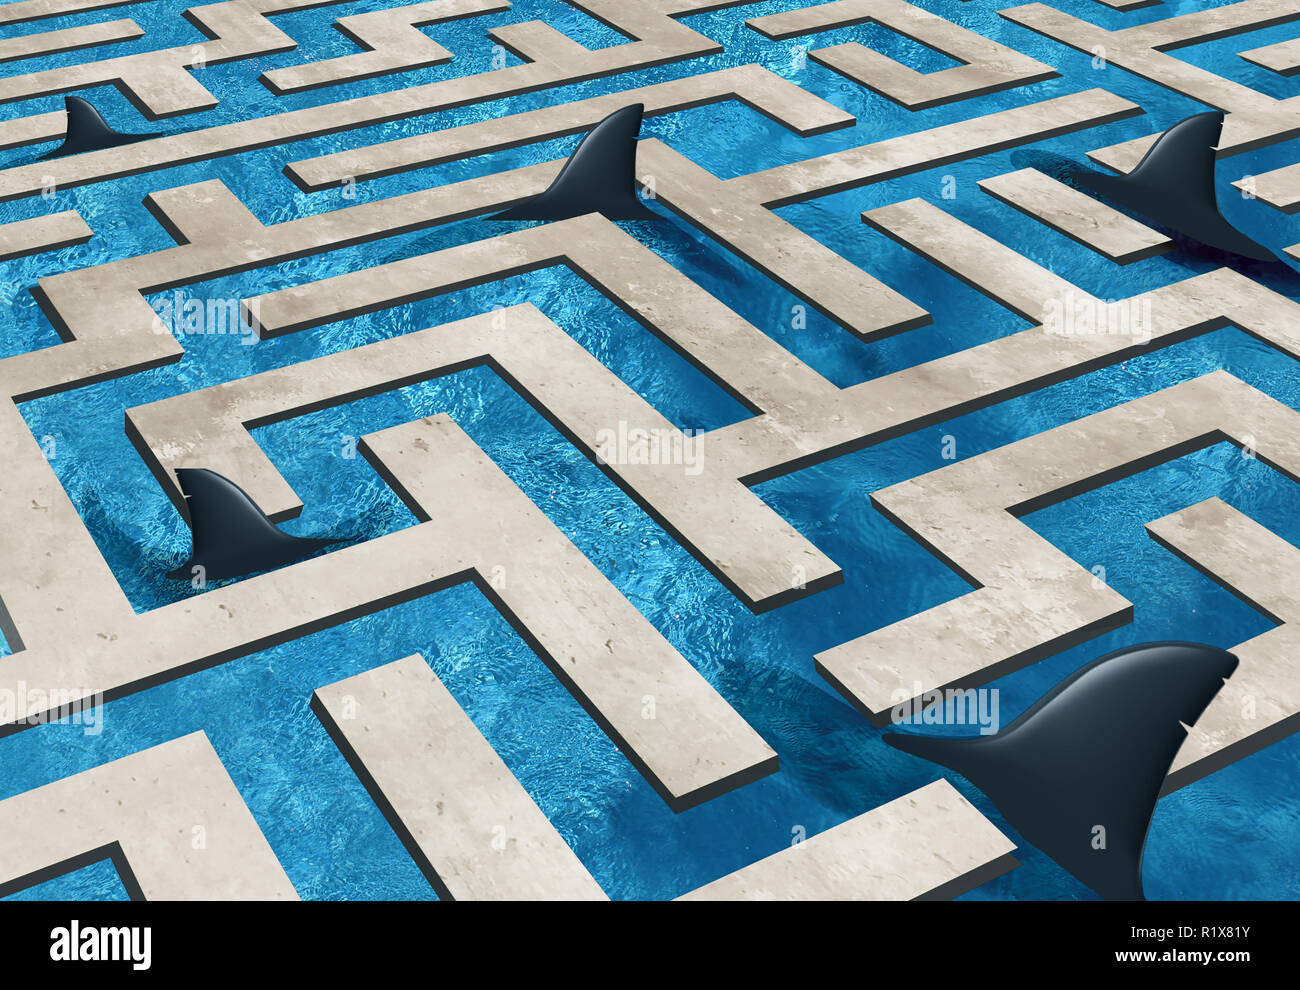 Challenge risk business and insurance symbol as a maze pool infested with dangerous sharks with 3D illustration elements. Stock Photo